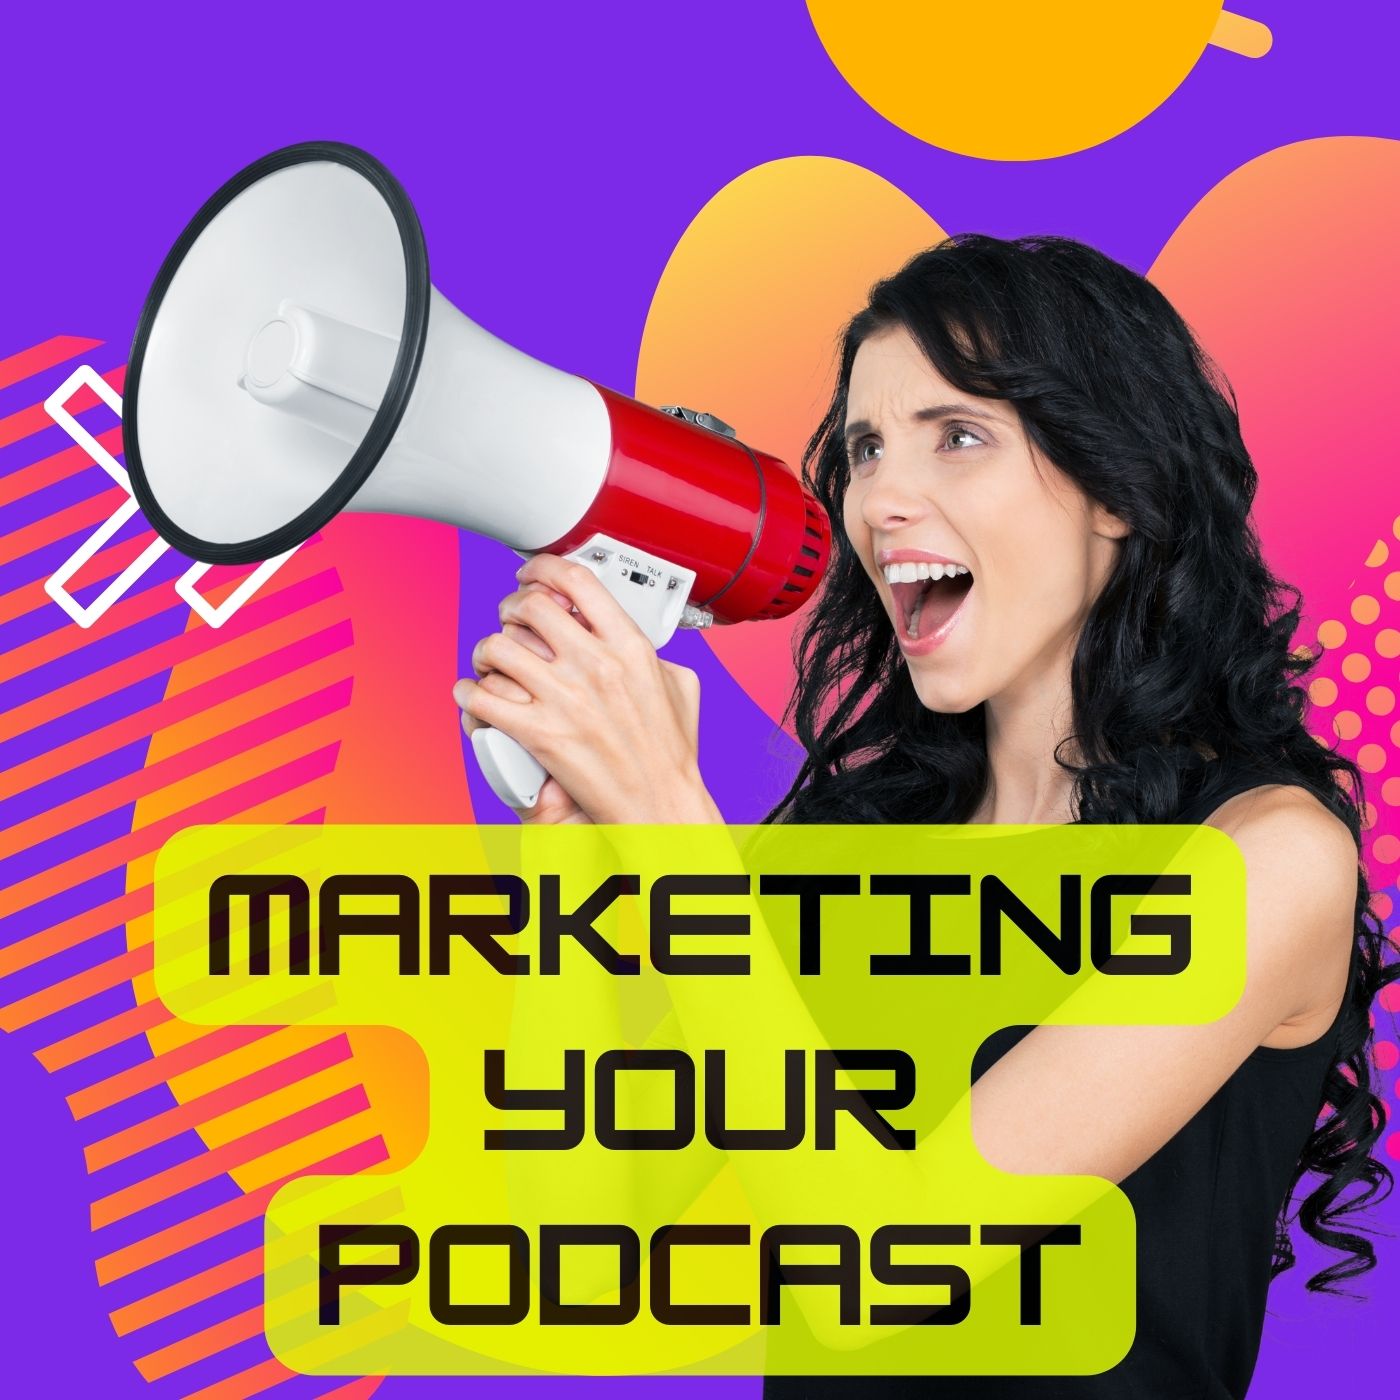 Marketing Your Podcast